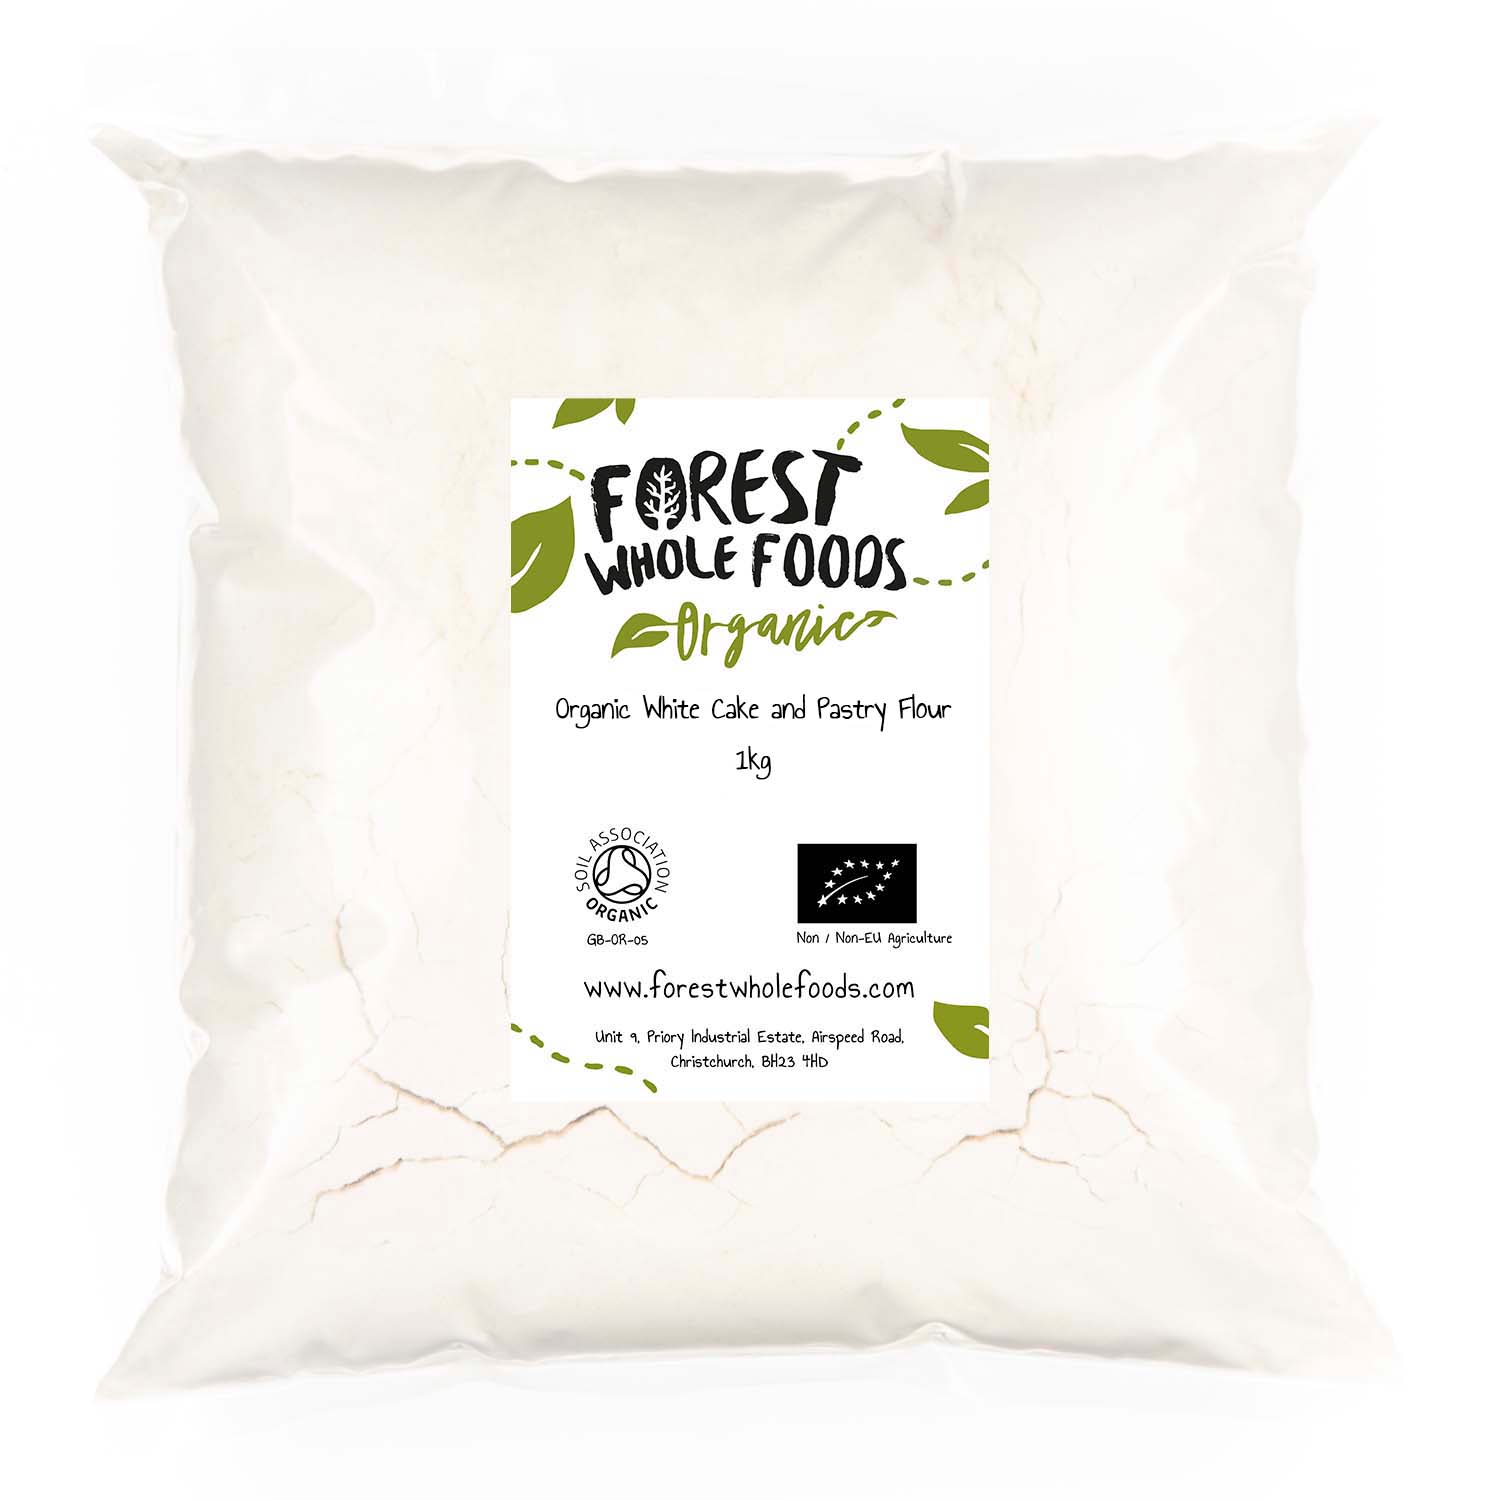 Organic White Cake and Pastry Flour 1kg